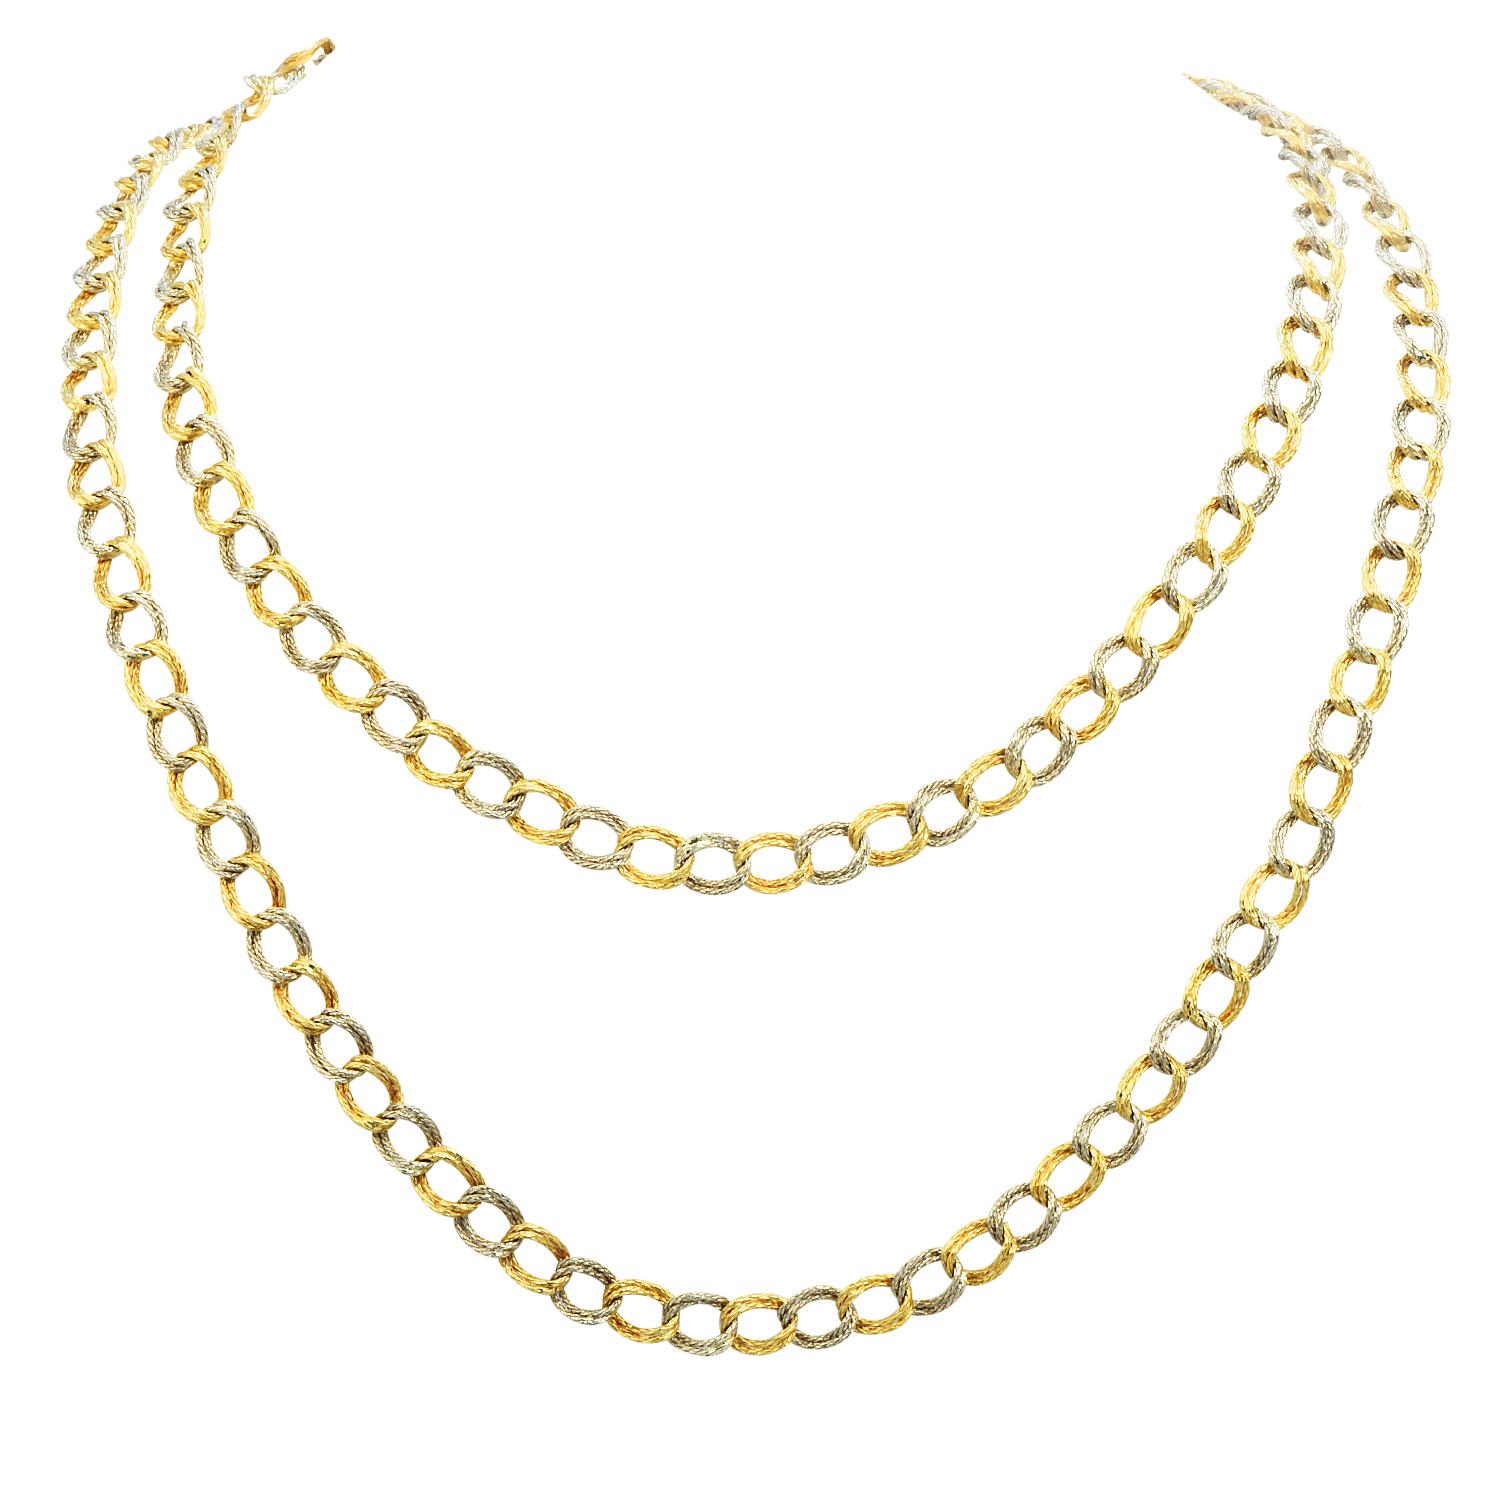 A versatile piece of jewelry, this exquisite chain can be worn as a double link necklace, or with a hanging pendant.

The ultimate modern look, can include this piece as part of a halter top or even as a purse chain.

With this high-quality 18K